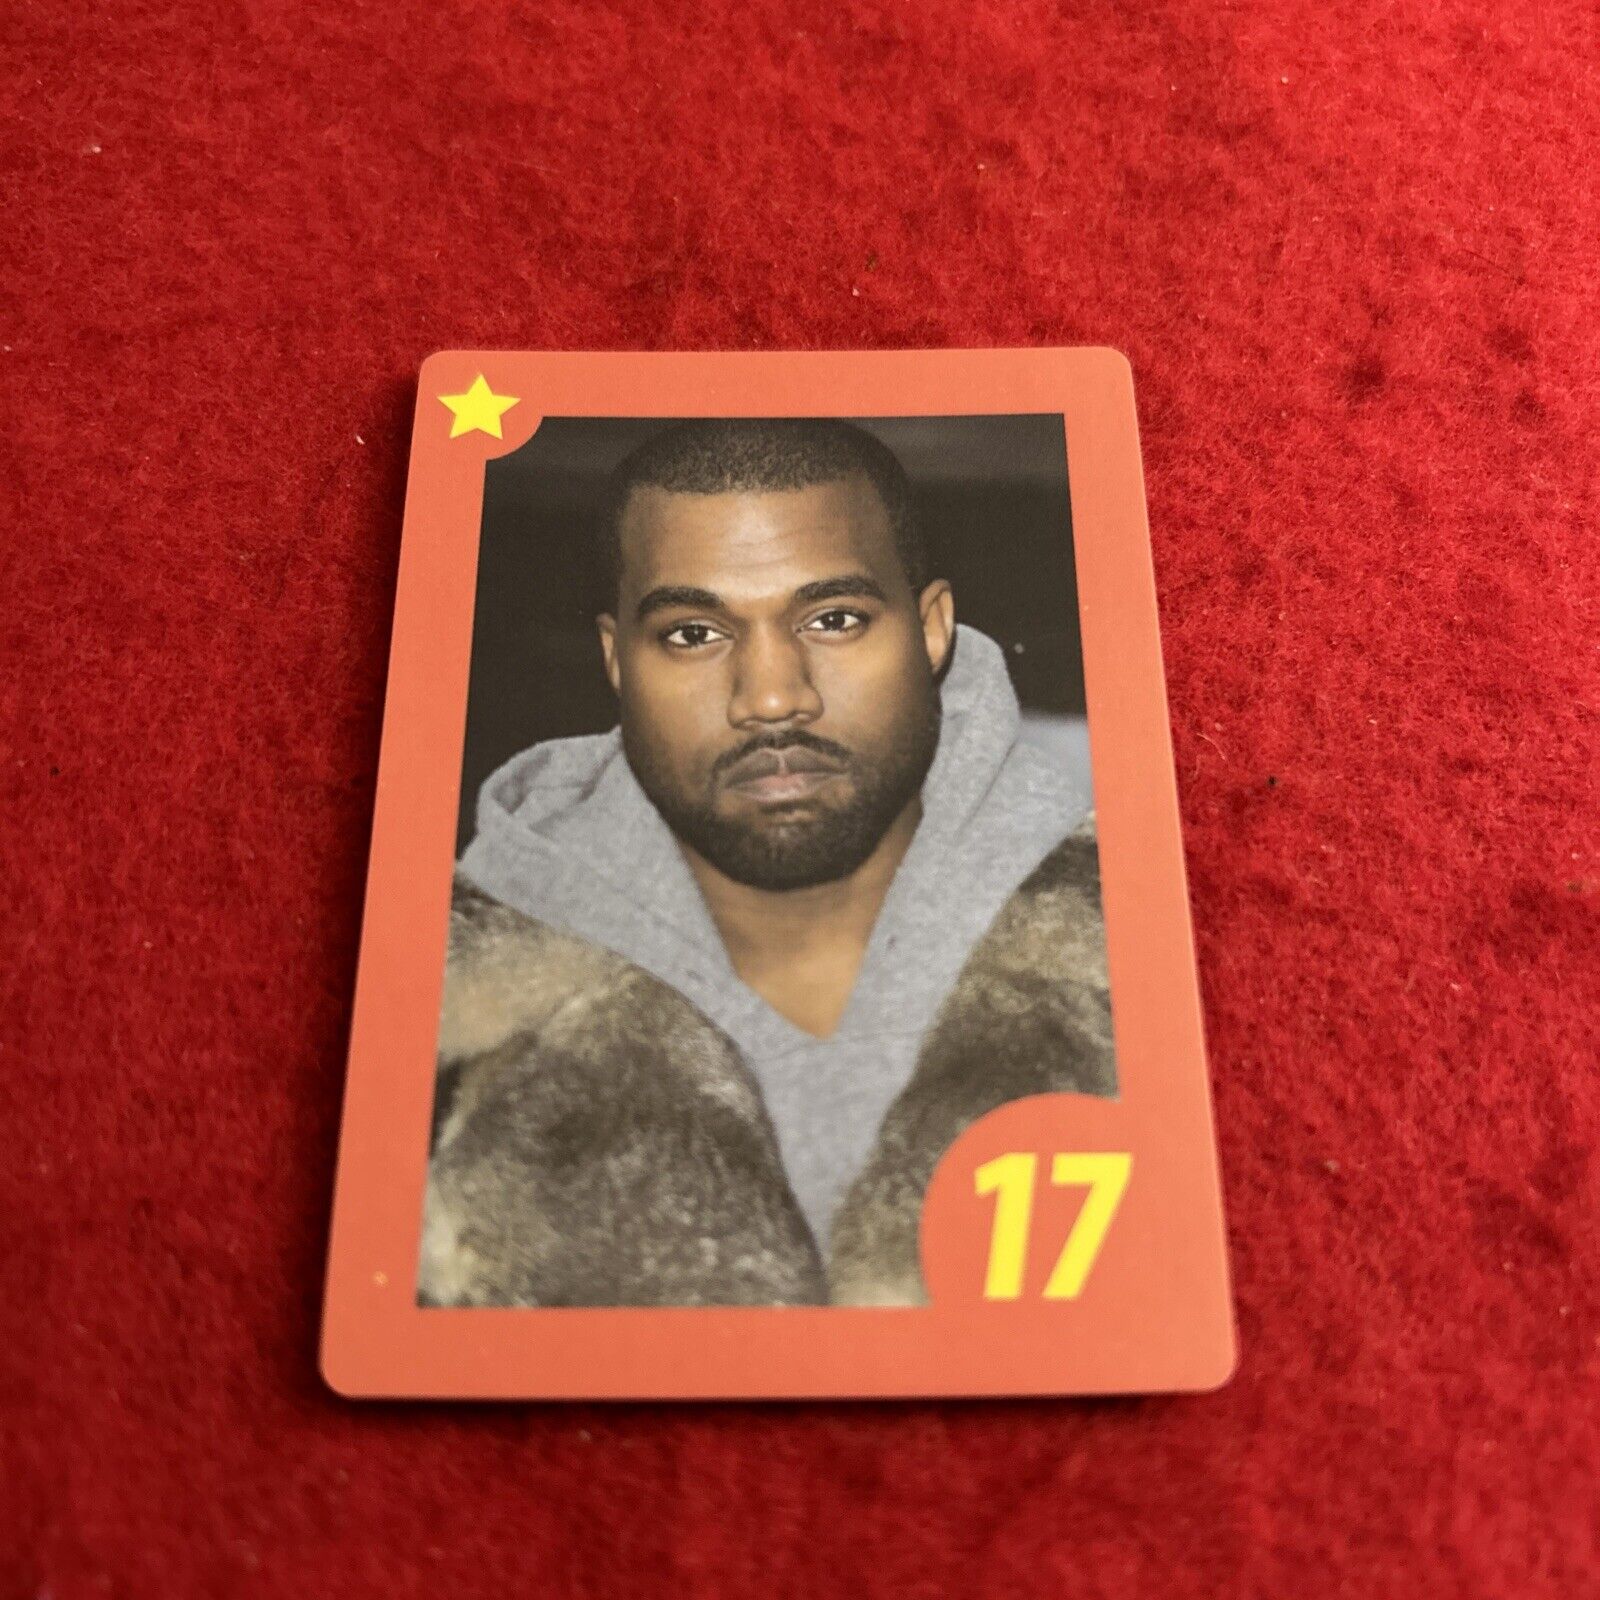 2020 Kanye West Paladone Game Card Red #17 Celebrity Guessing Game Who Is It?